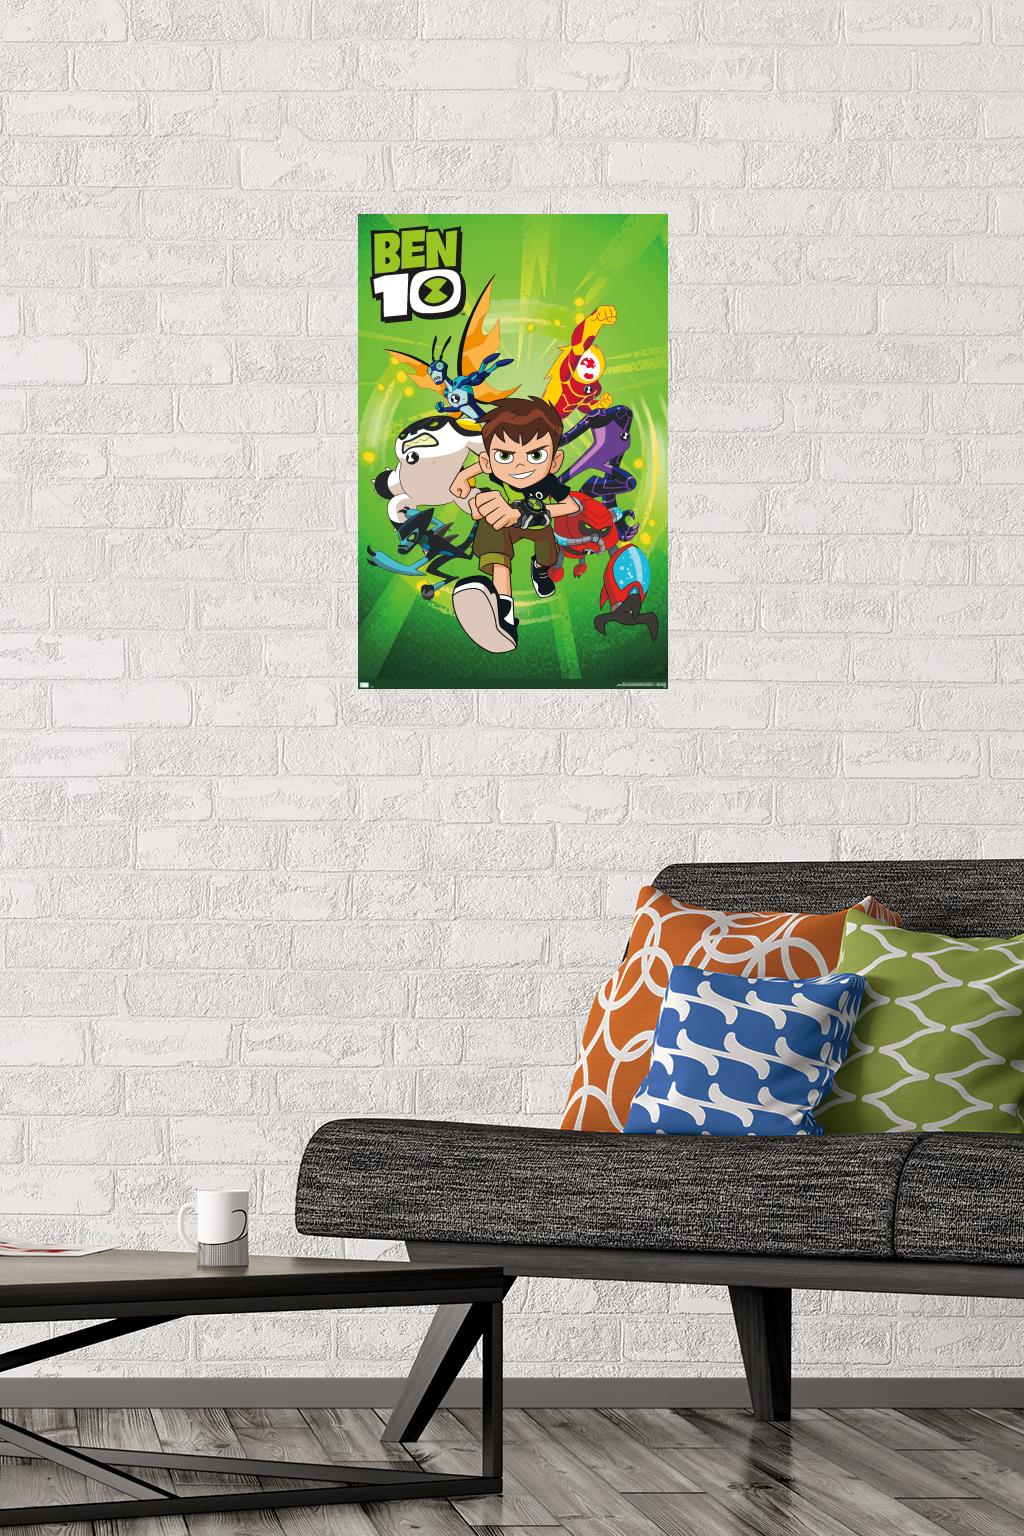 Ben 10 - Group Wall Poster, 14.725" x 22.375" - image 2 of 3